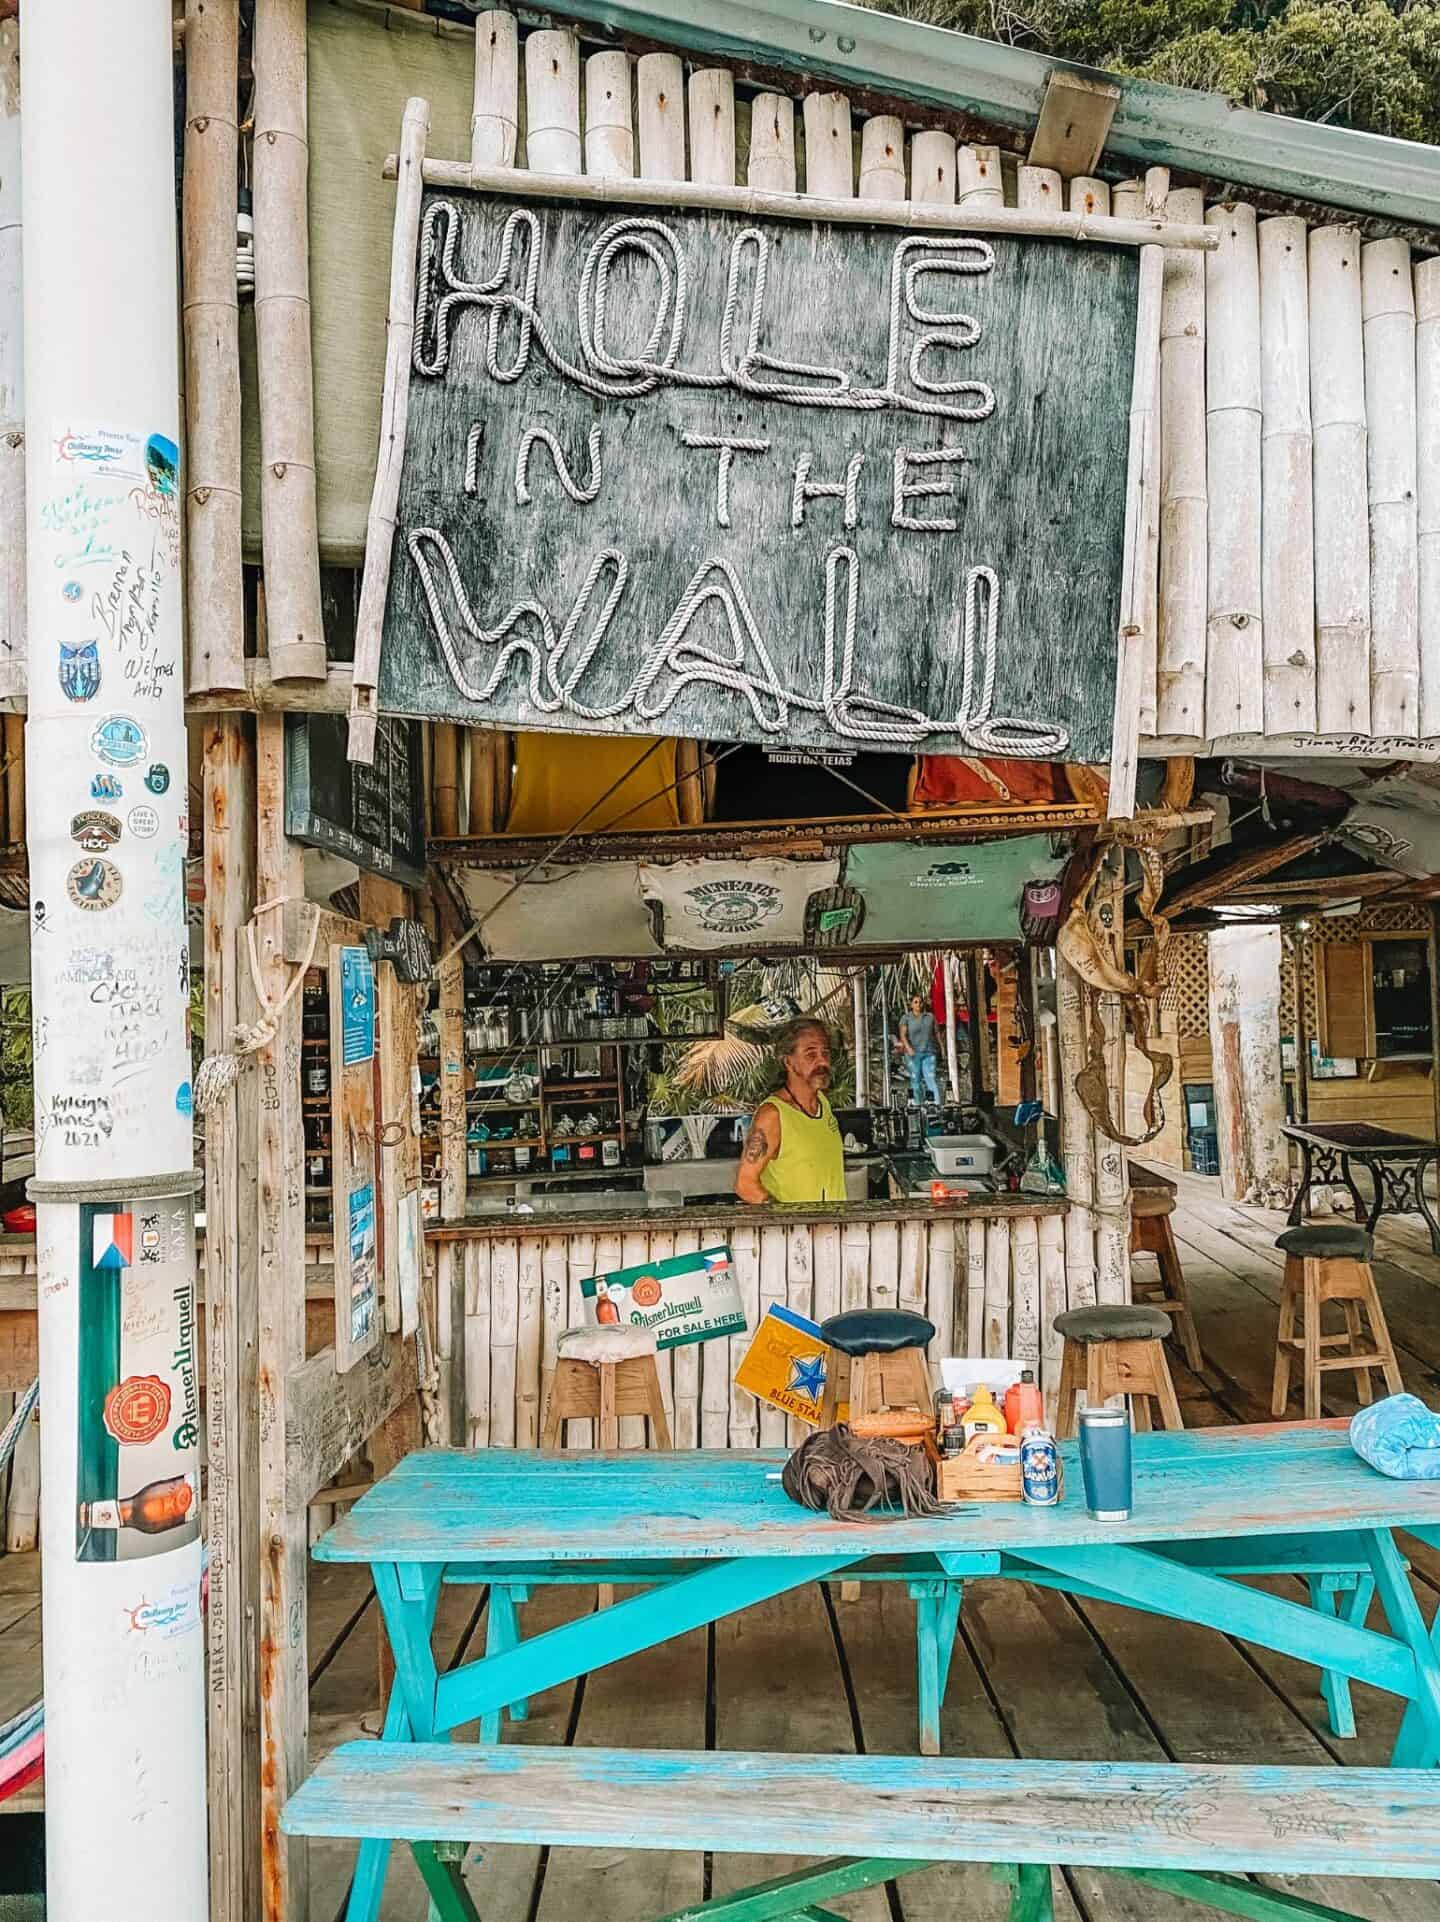 Hole in the Wall is one of the best bars in the Roatan Nightlife scene...well really daylife